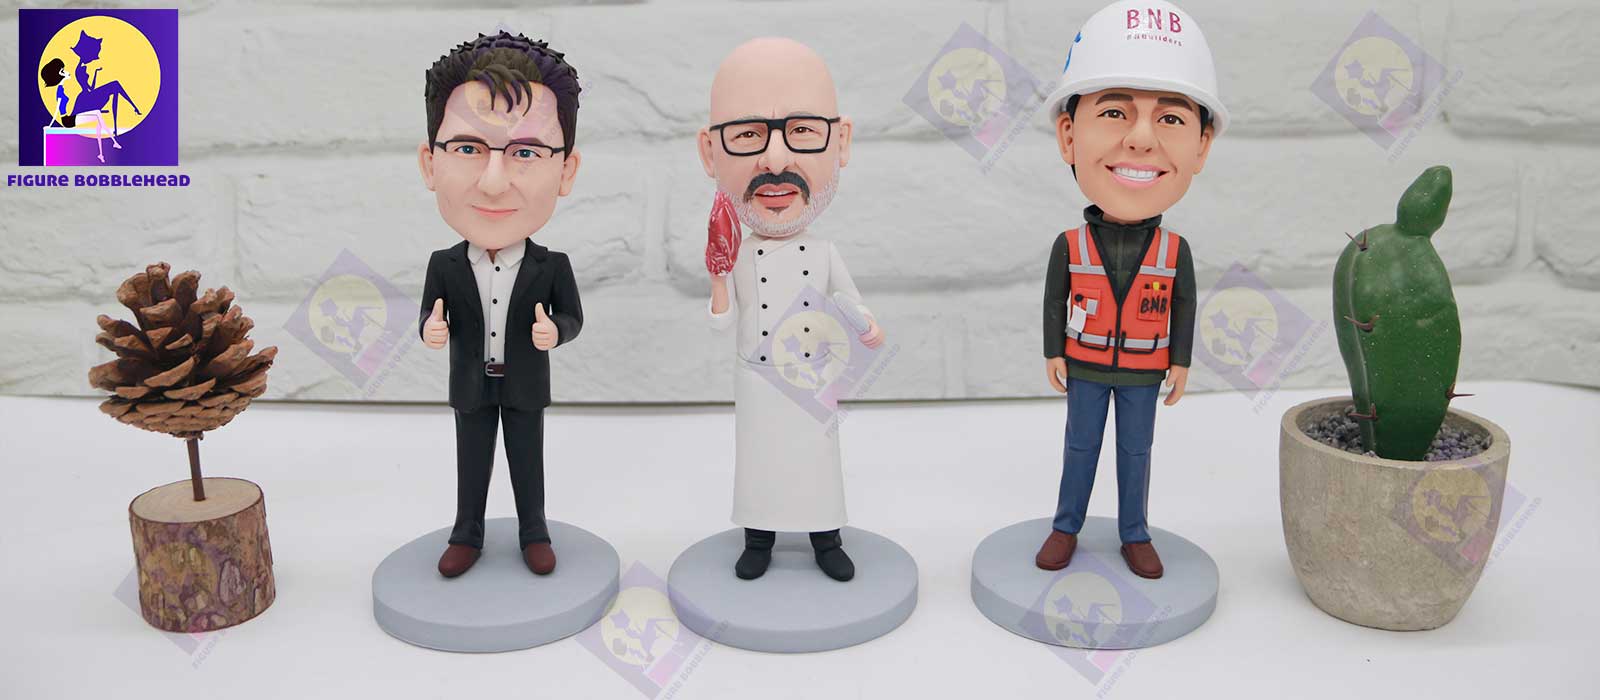 custom-bobbleheads-for-Fathers-day-figure-bobblehead